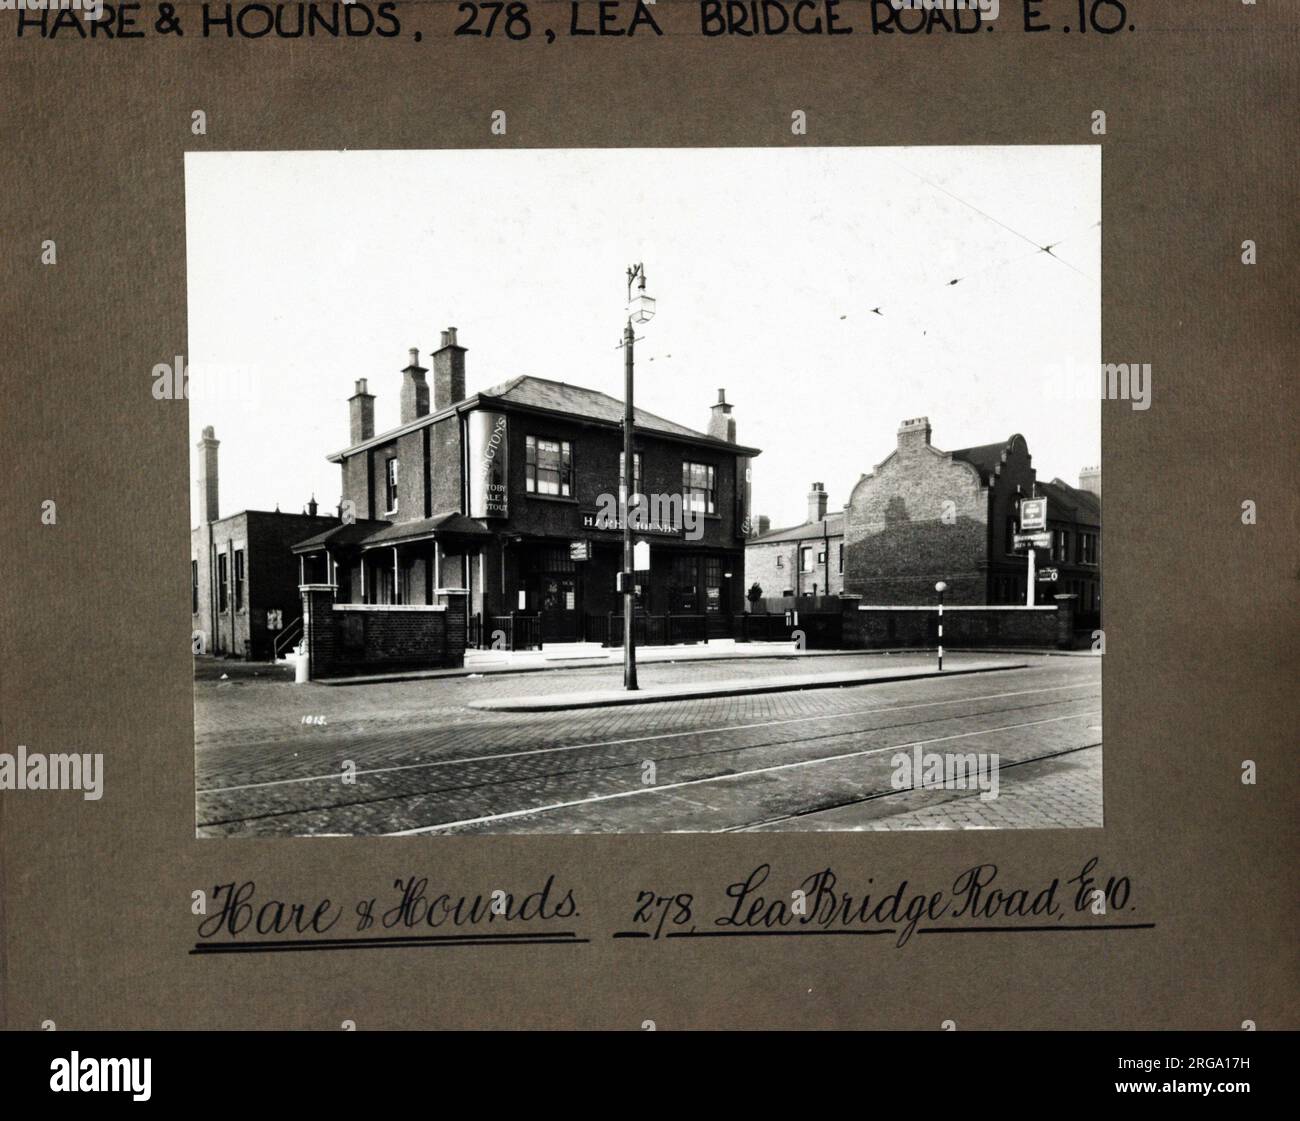 Photograph of Hare & Hounds PH, Lea Bridge, London. The main side of the print (shown here) depicts: Left Face on view of the pub.  The back of the print (available on request) details: Nothing for the Hare & Hounds, Lea Bridge, London E10 7LD. As of July 2018 . Enterprise Inns Stock Photo